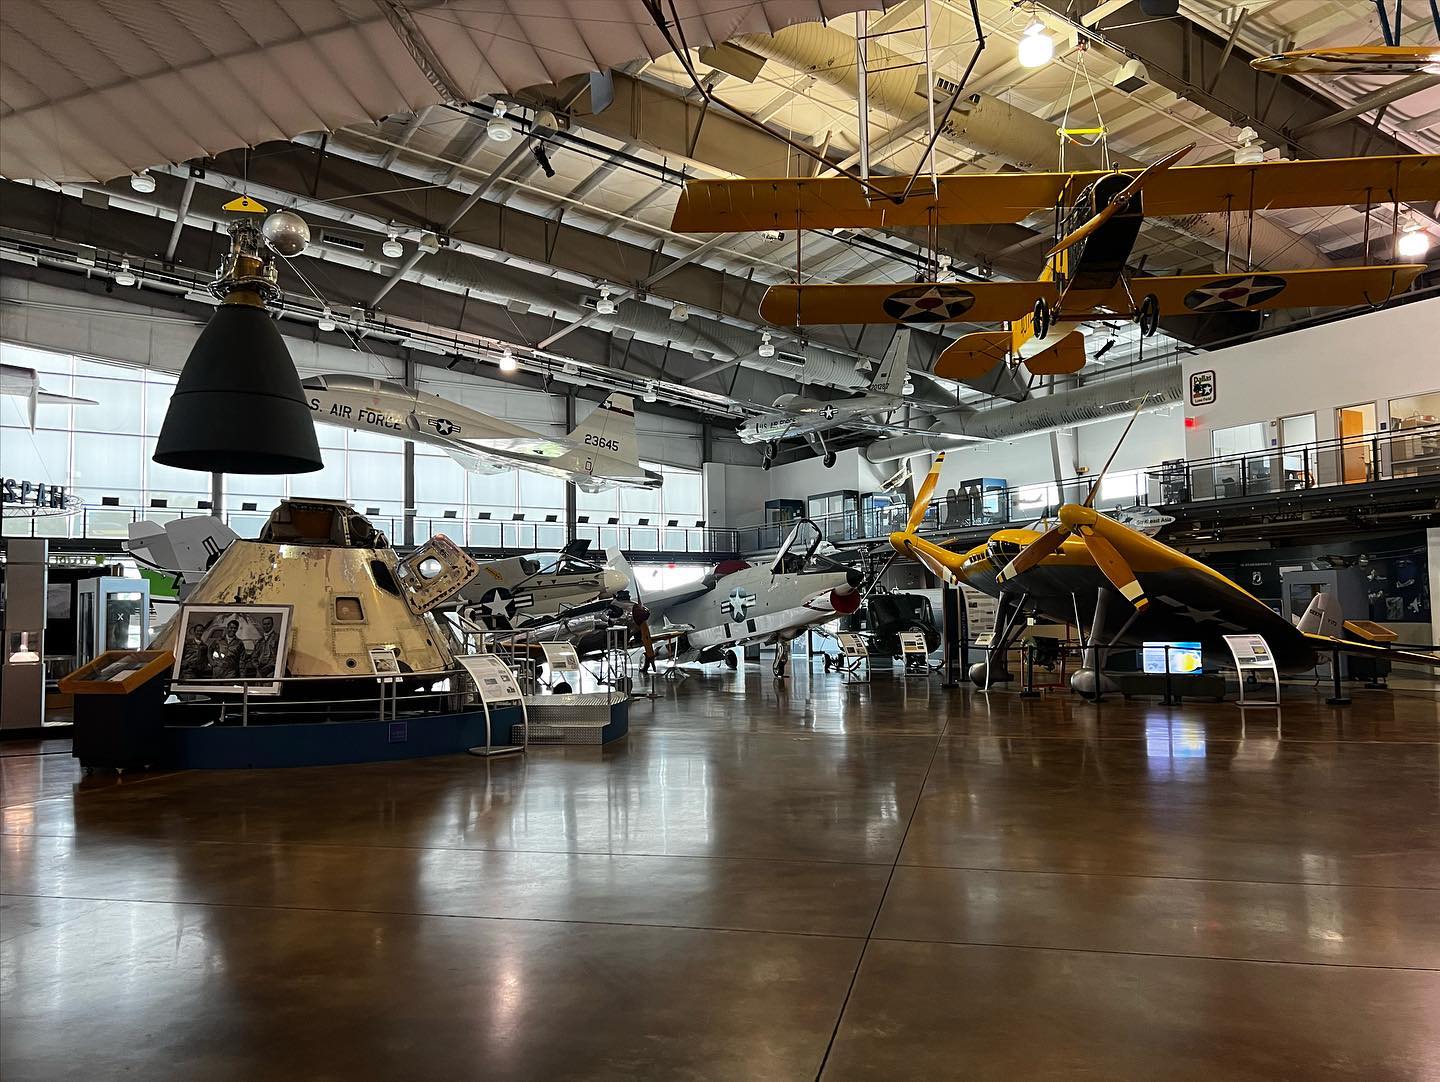 Several exhibits of aircraft and spacecraft at the Frontiers of Flight Museum.